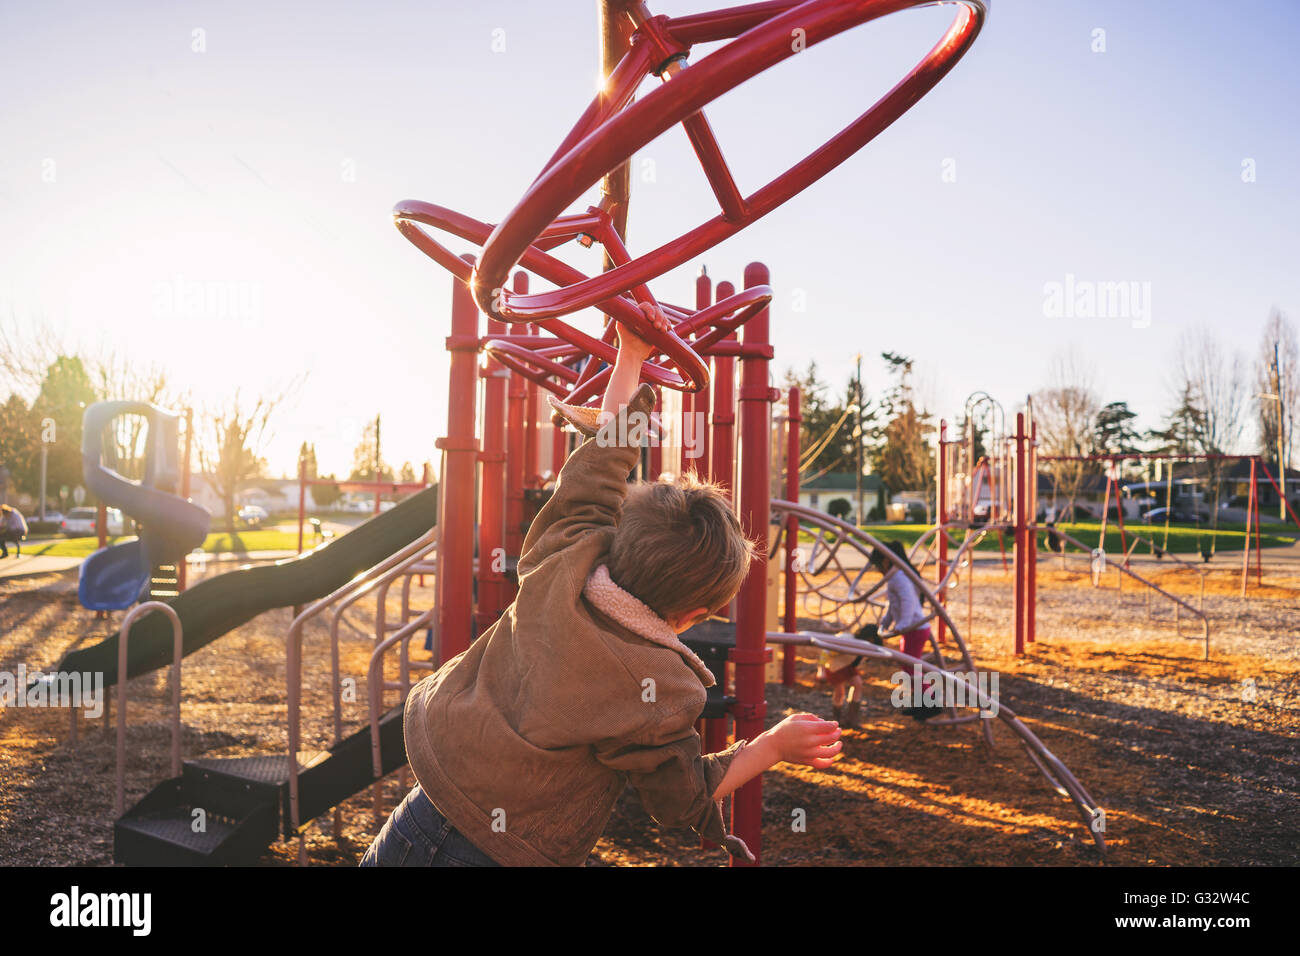 Rear view of boy swinging on monkey bars in playground Stock Photo